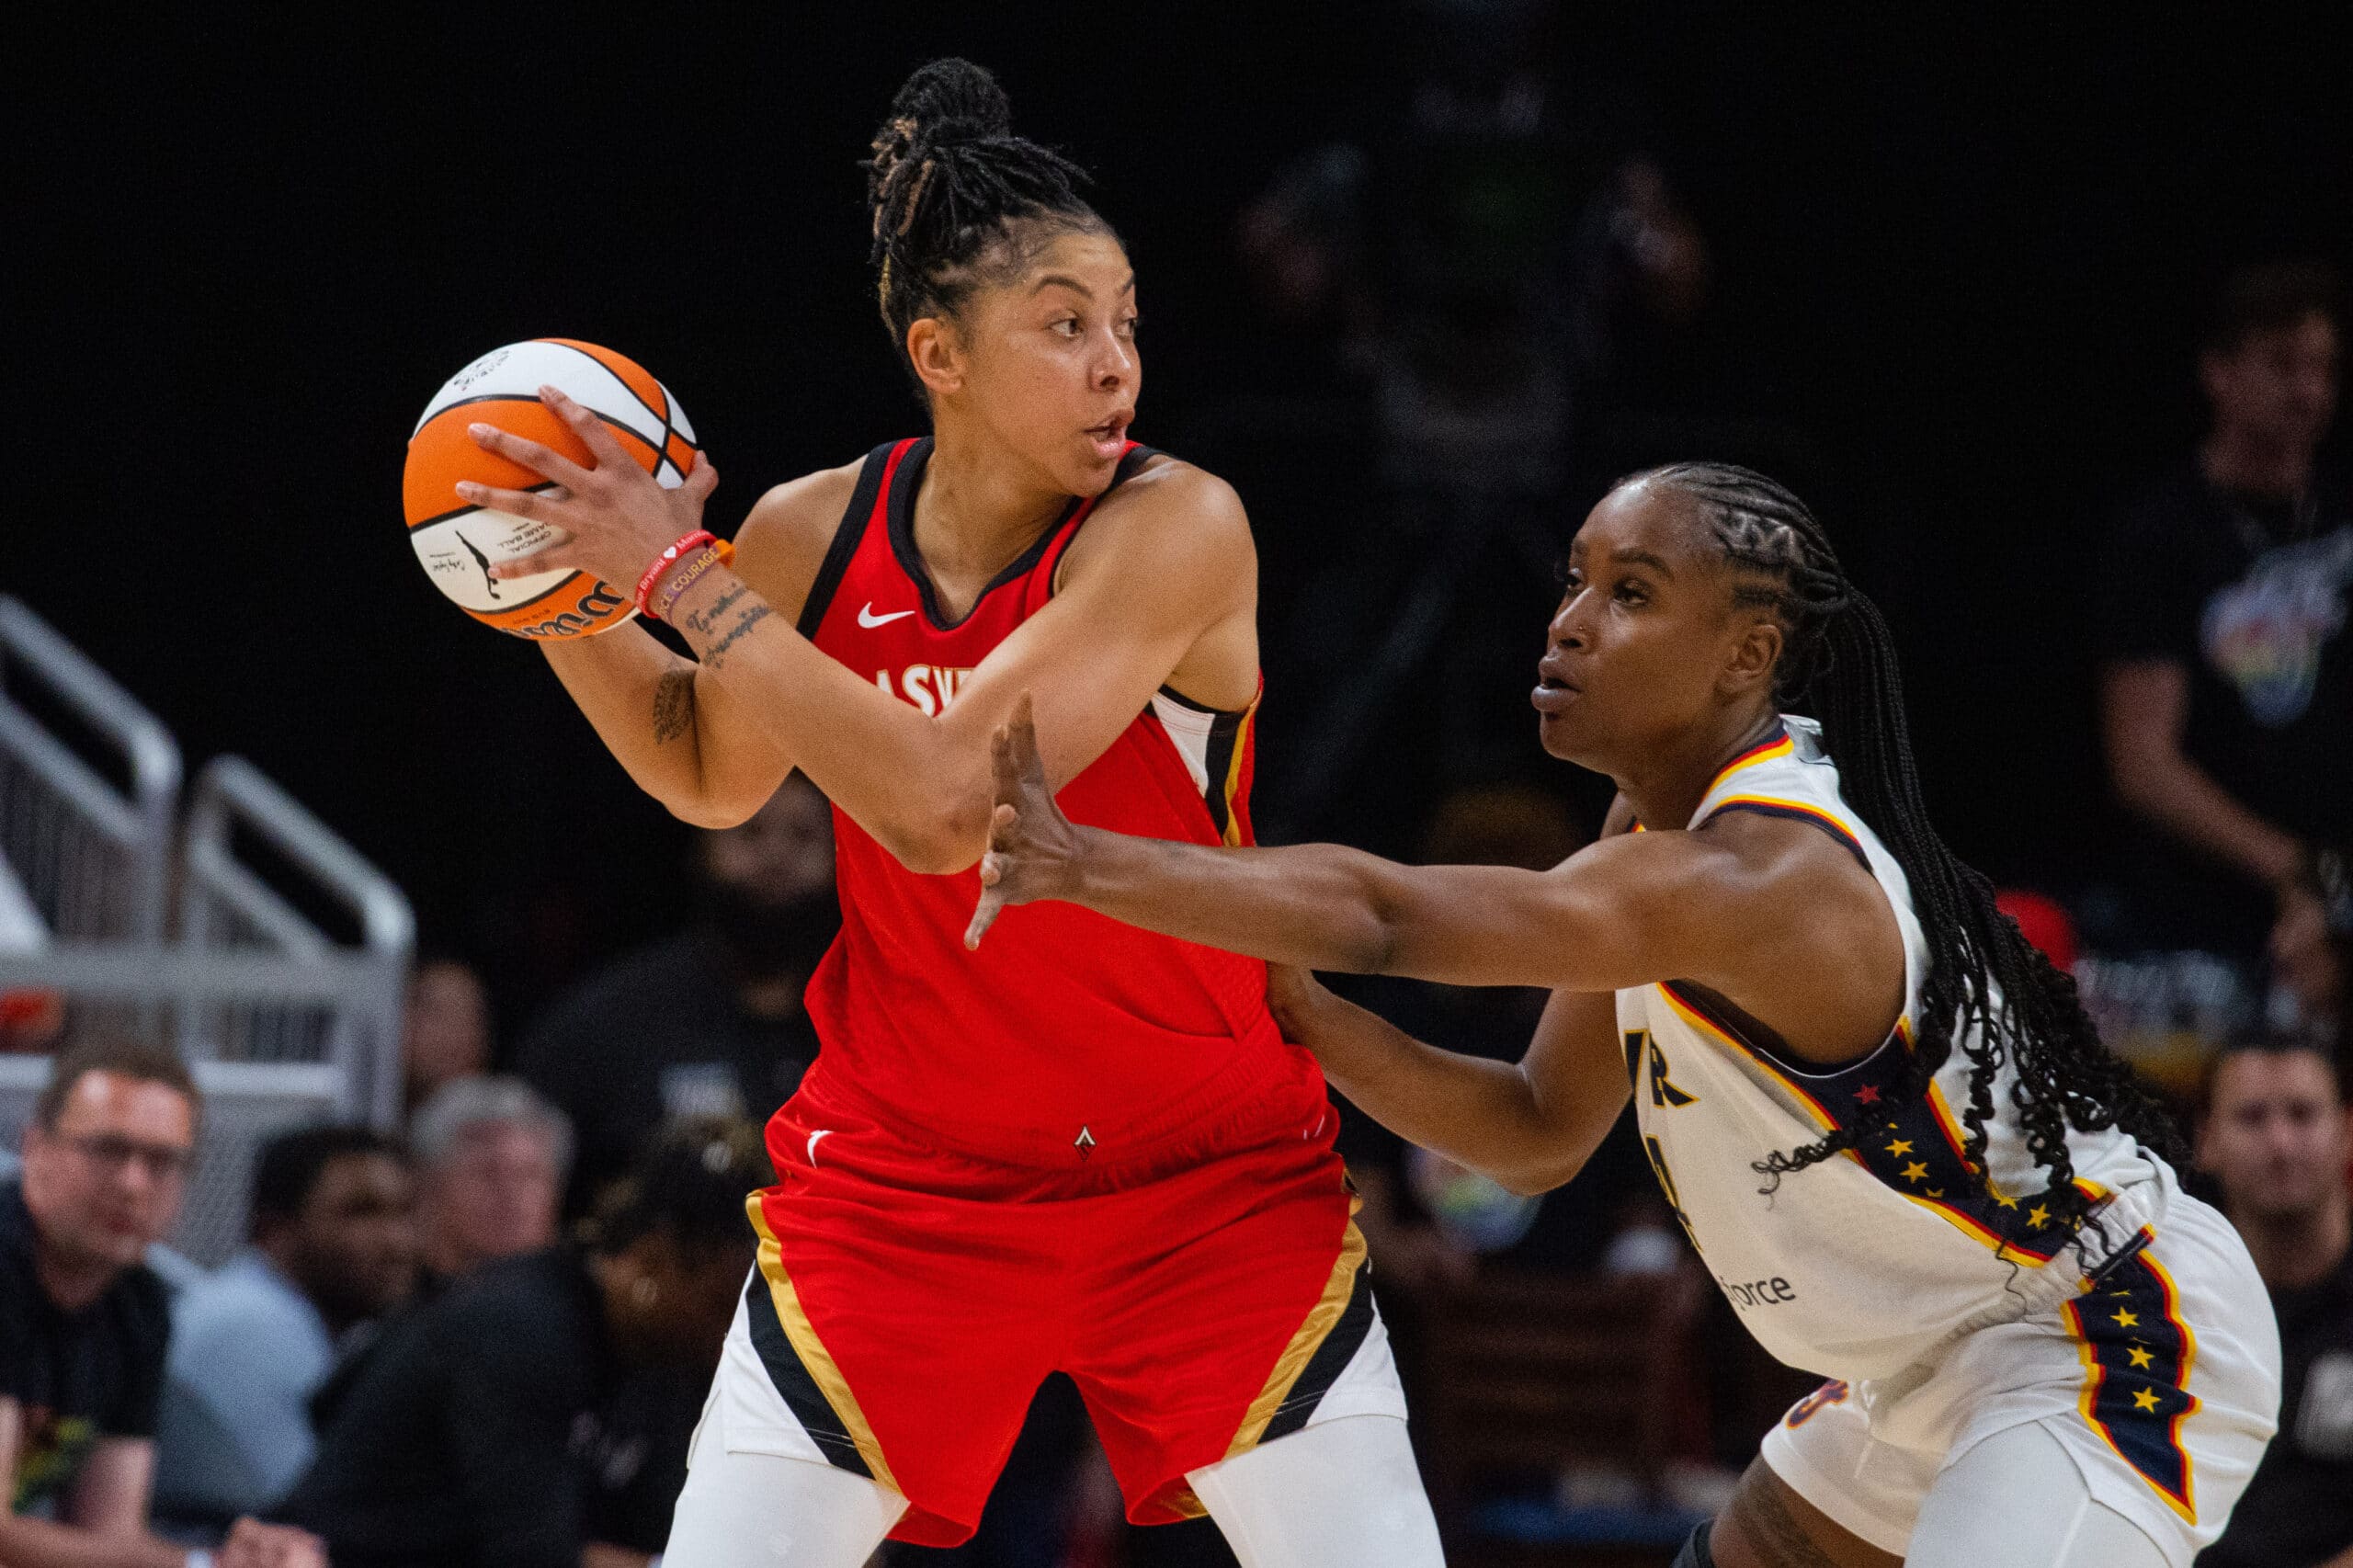 WNBA MVP Says Owners Need To Do More For Players